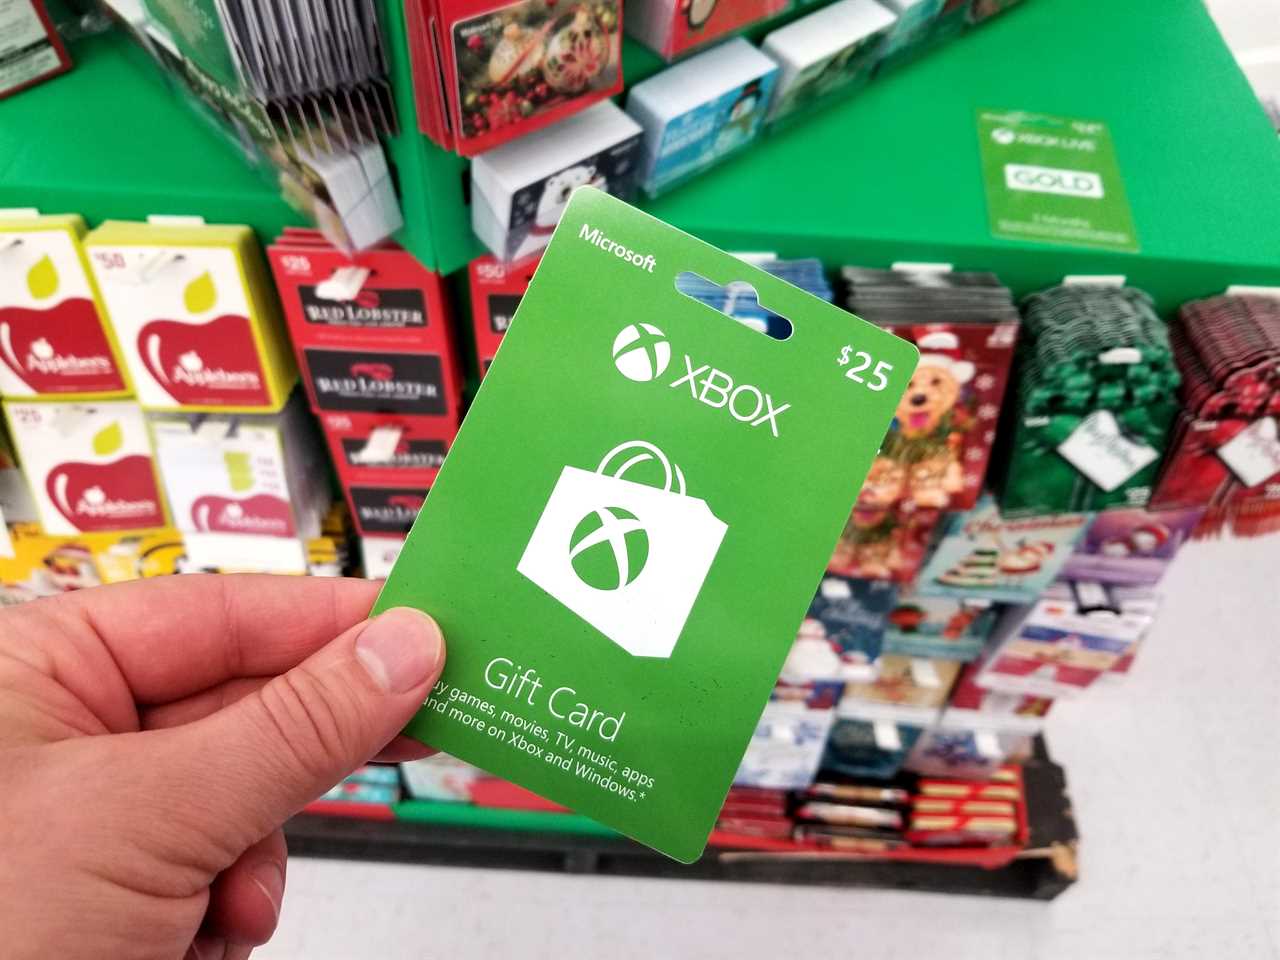 Where to buy an Xbox gift card and which shops sell them?